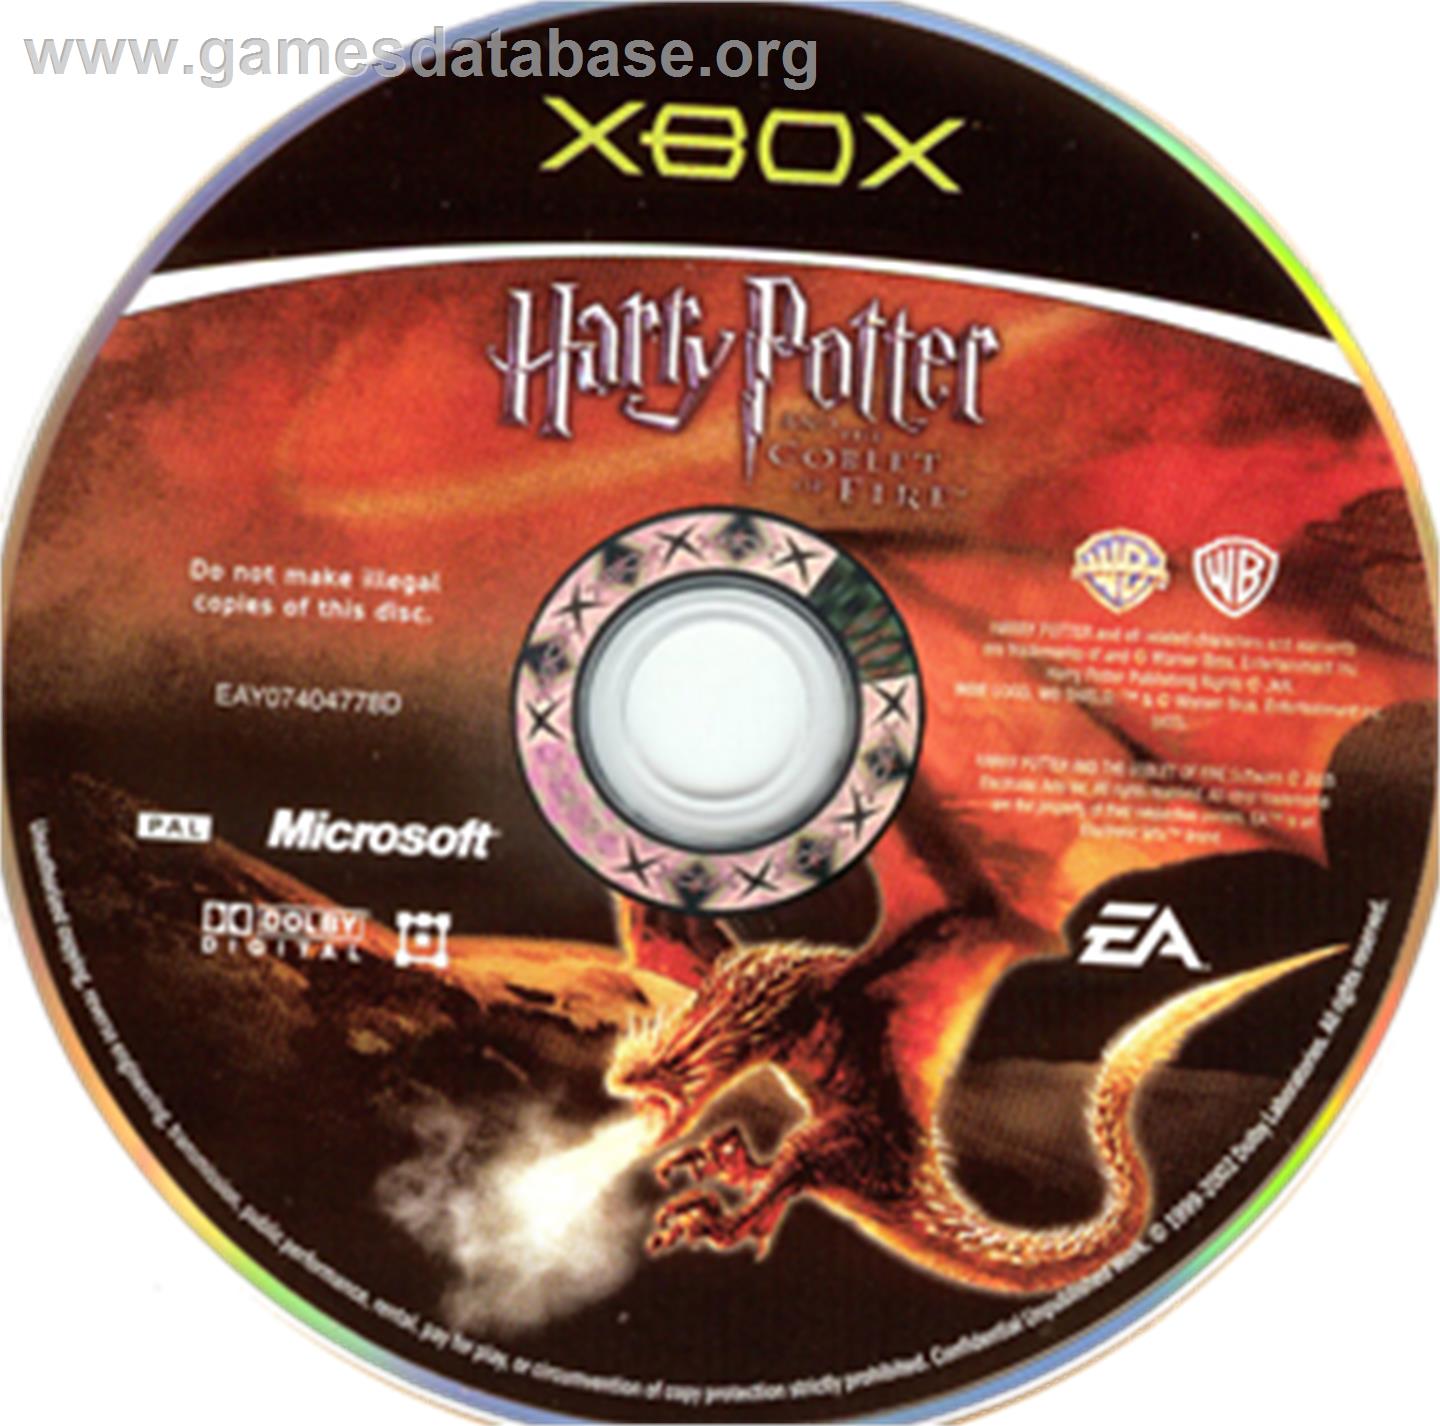 Harry Potter and the Goblet of Fire - Microsoft Xbox - Artwork - CD